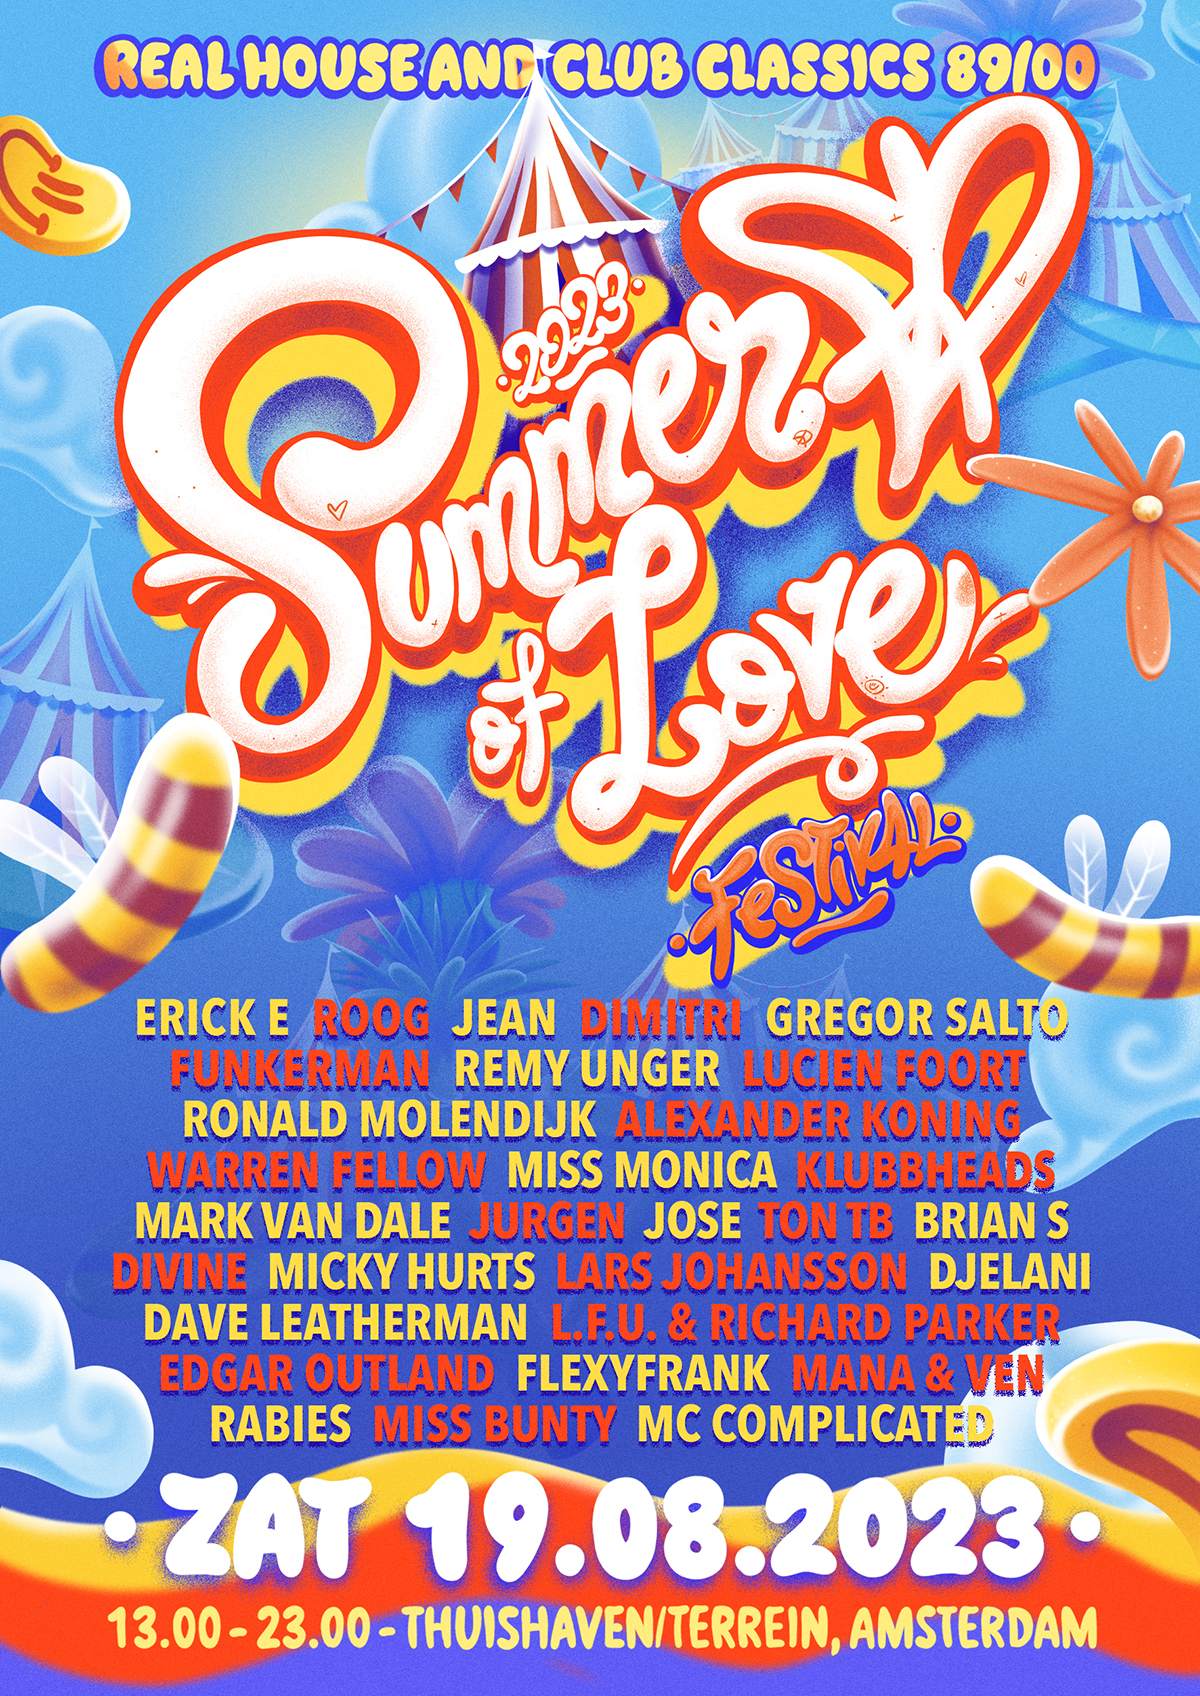 SOLD OUT - Summer Of Love - Thuishaven[terrein] - Real House & Club Classics 89/05 - Página trasera